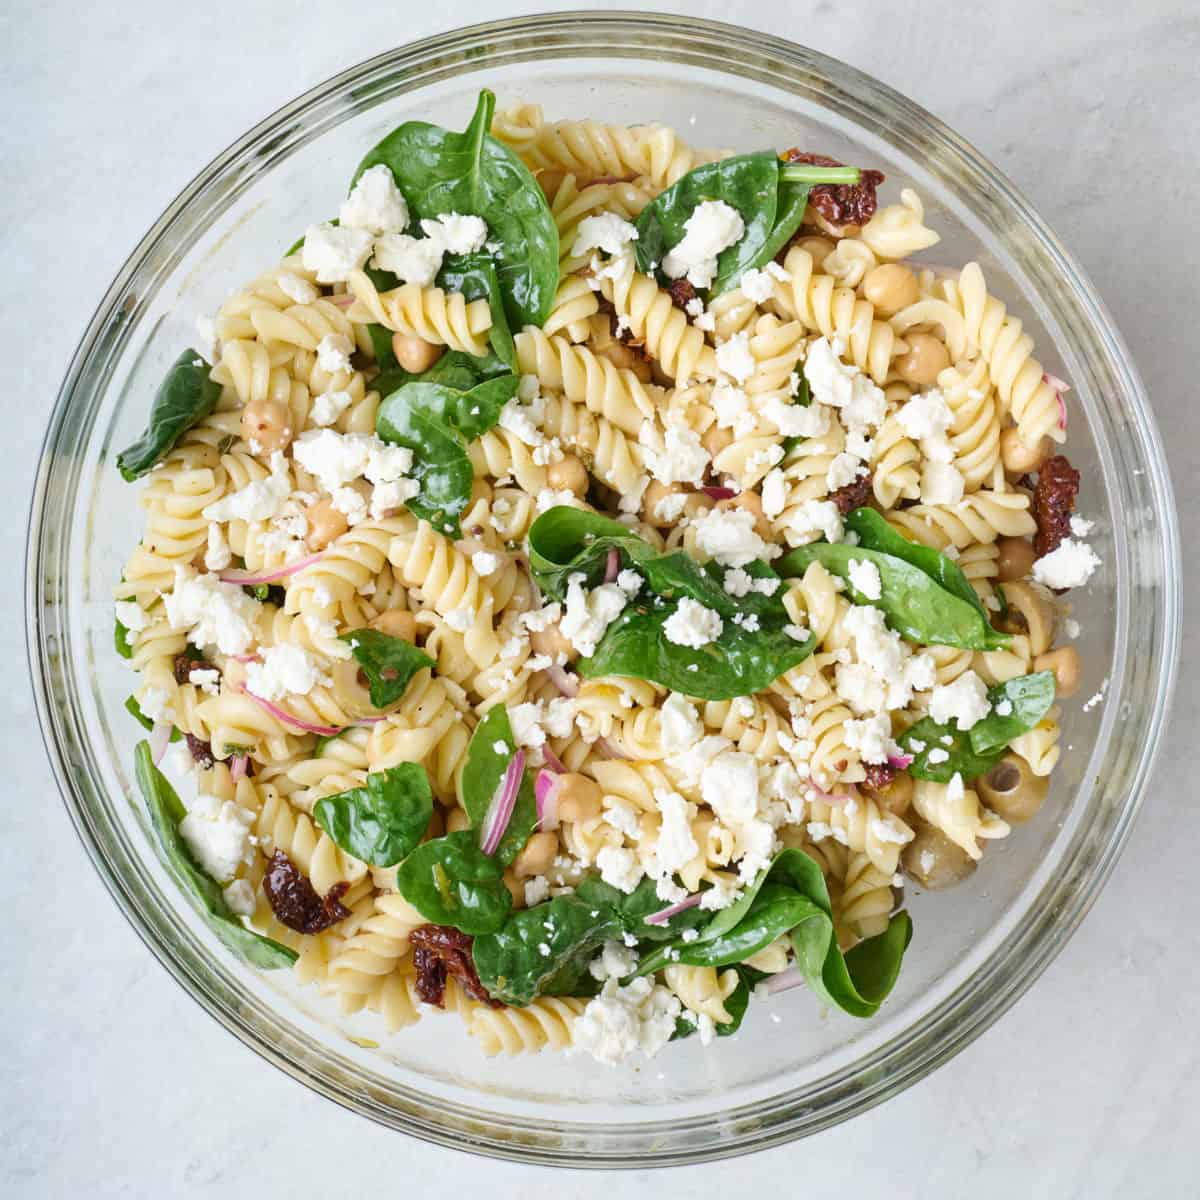 Sun-dried tomato pasta salad topped with crumbled feta cheese.